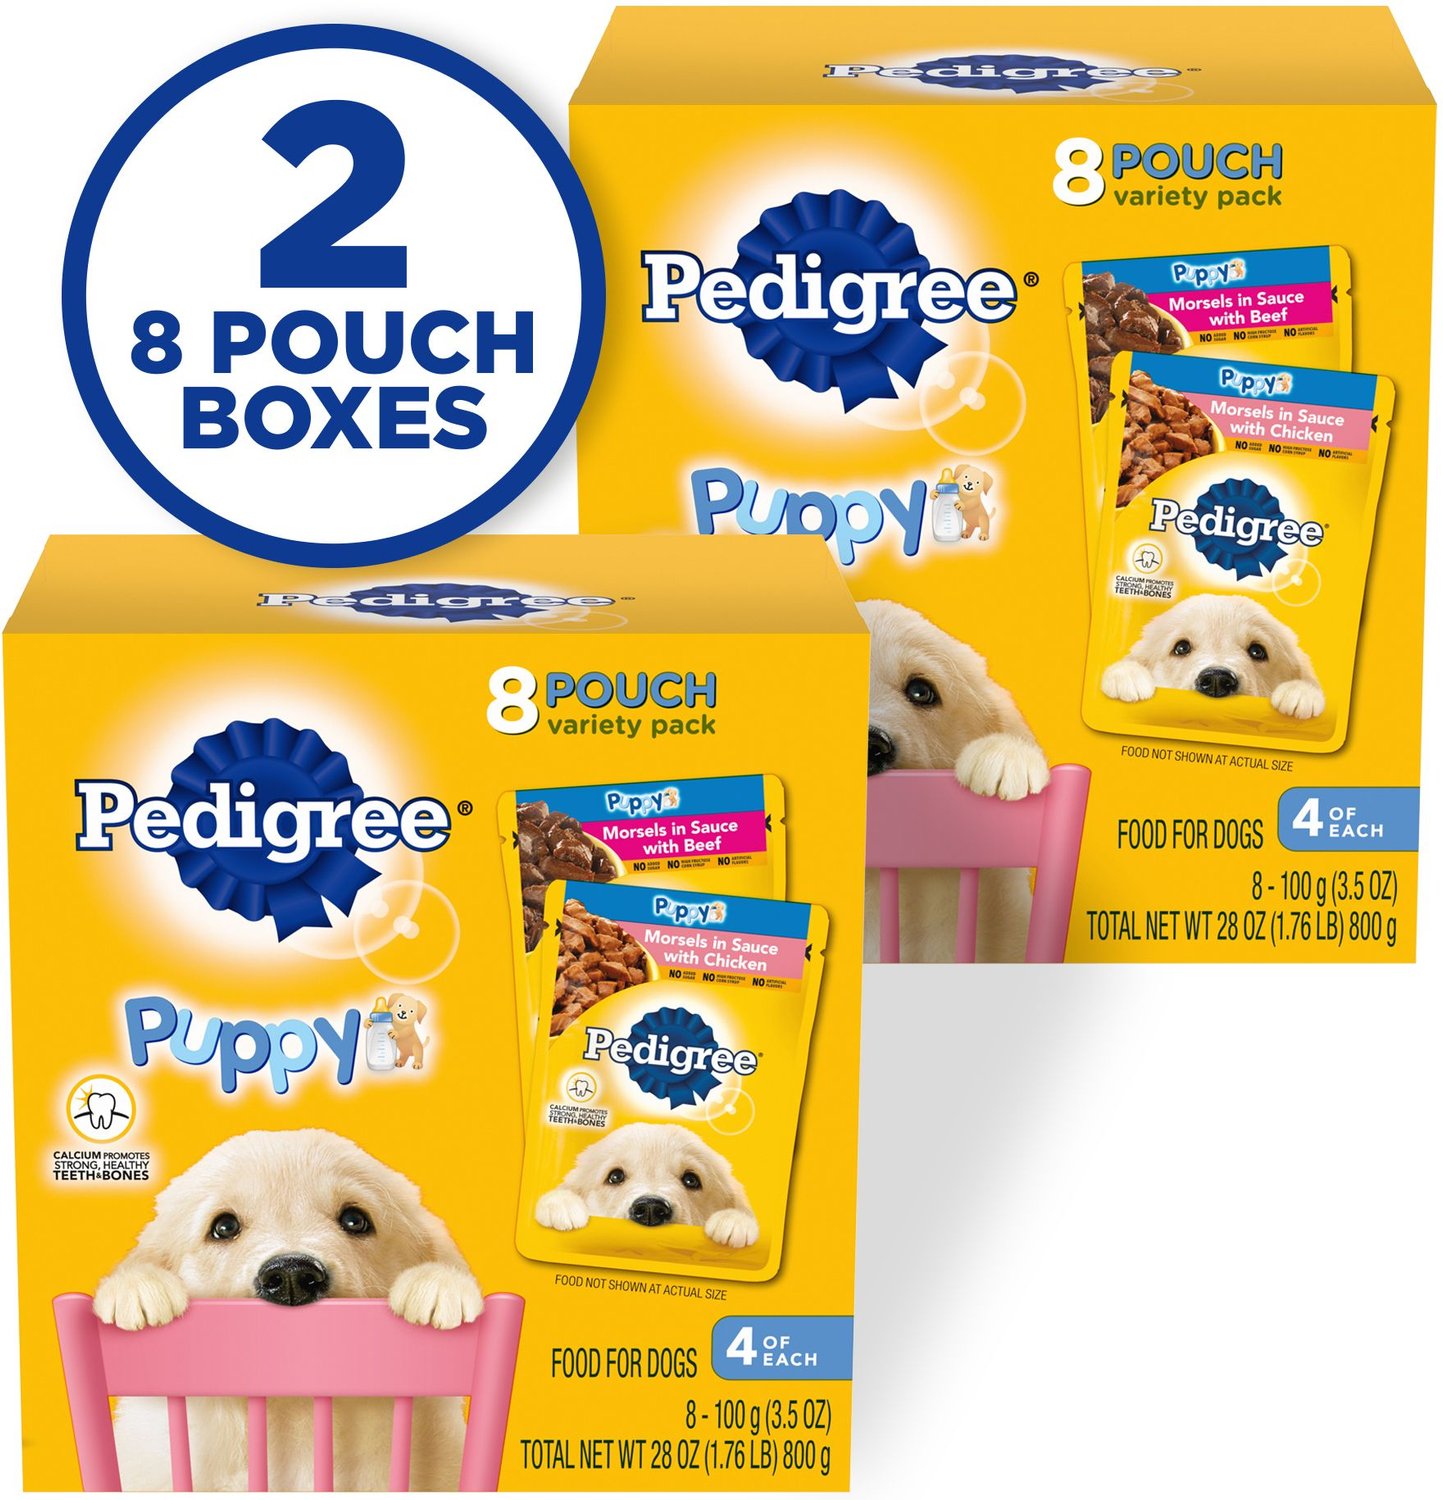 PEDIGREE Puppy Variety Pack Morsels in Sauce with Beef Chicken Wet Dog Food Pouches, 3.5-oz pouch, pack of 8, bundle of 2 - Chewy.com